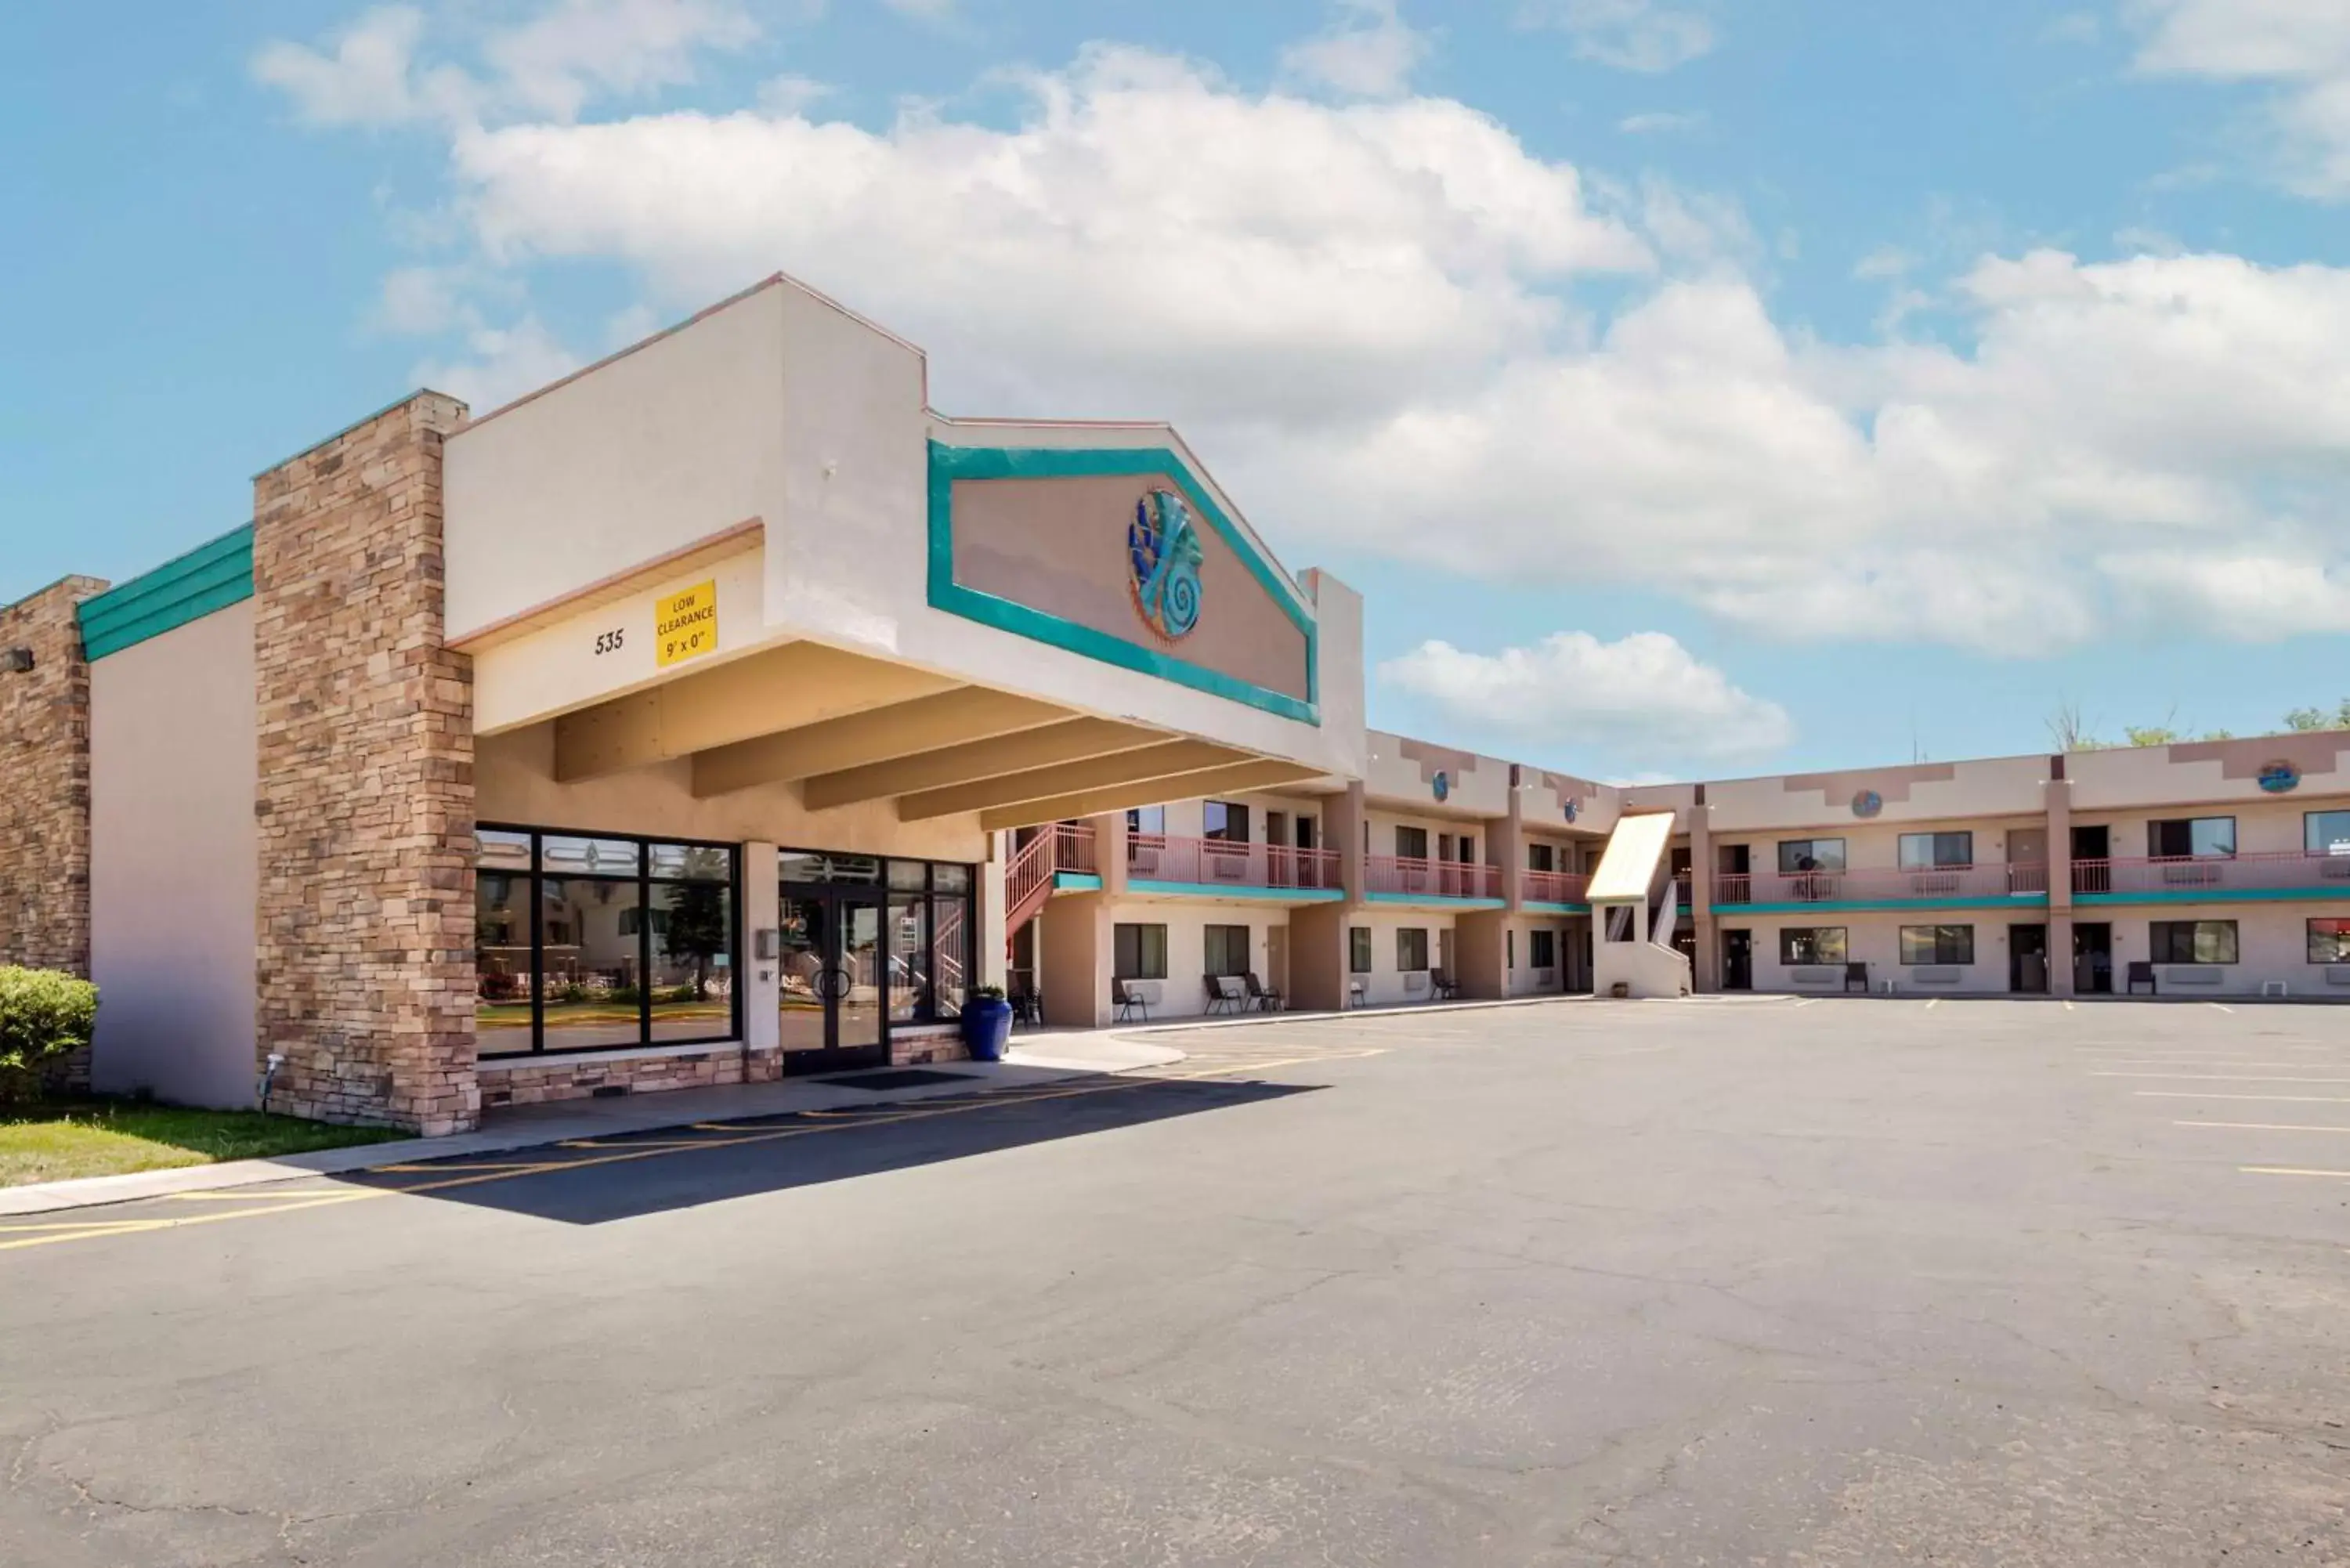 Property Building in Best Western Turquoise Inn & Suites